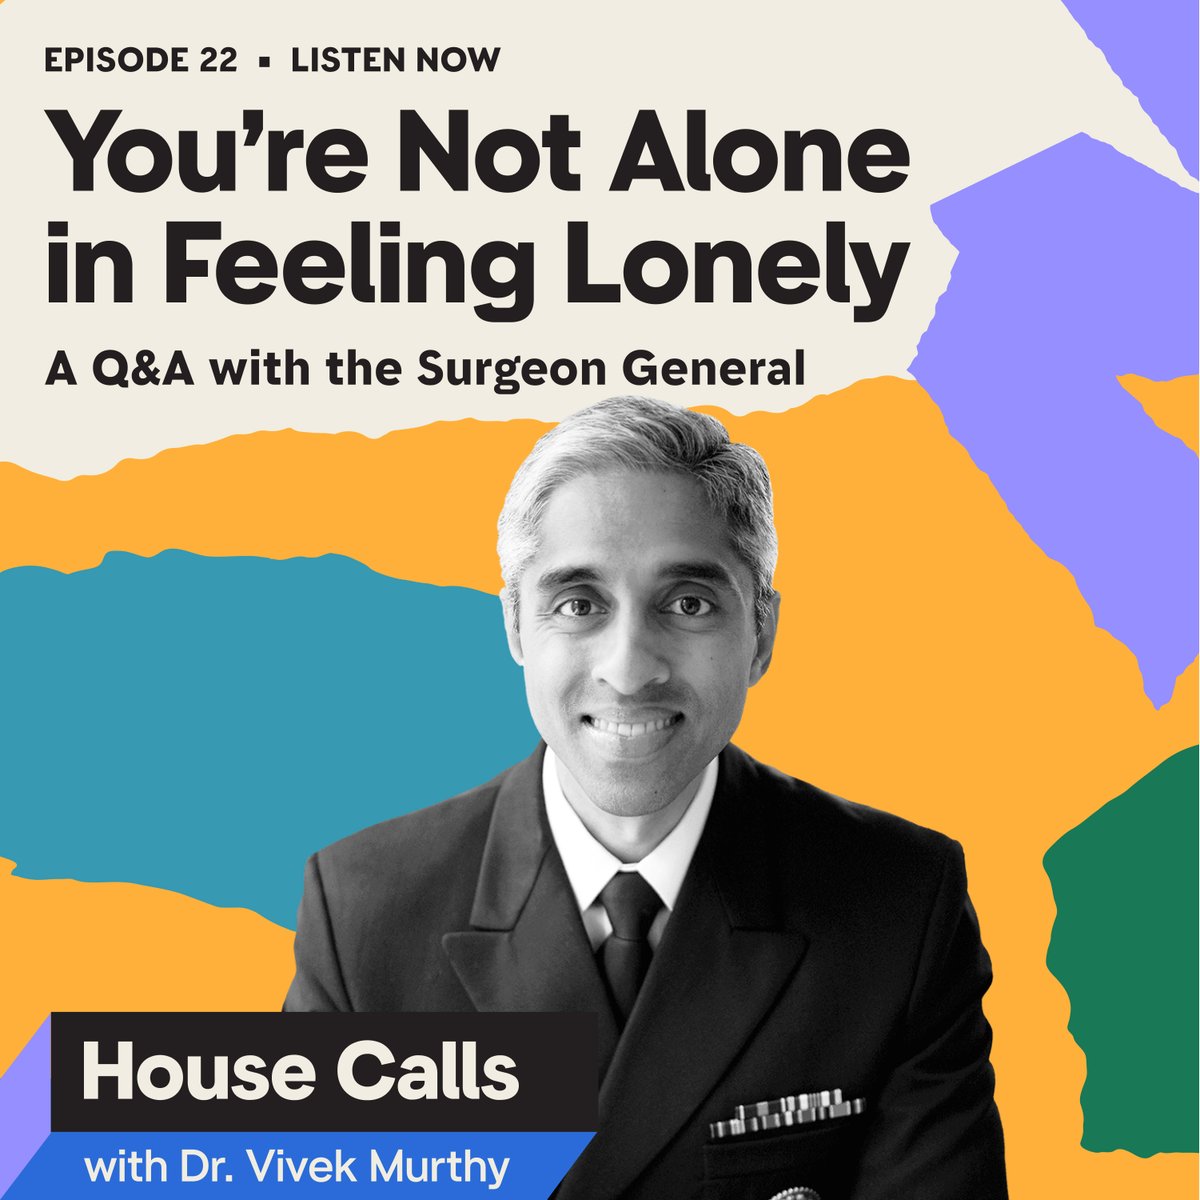 On this special NEW episode of #HouseCallswithVivekMurthy, I’m answering some of the most pressing questions about loneliness and isolation. Want to know how we can feel more connected with ourselves and each other? Listen now! #Connect2Heal bit.ly/44zgtRq